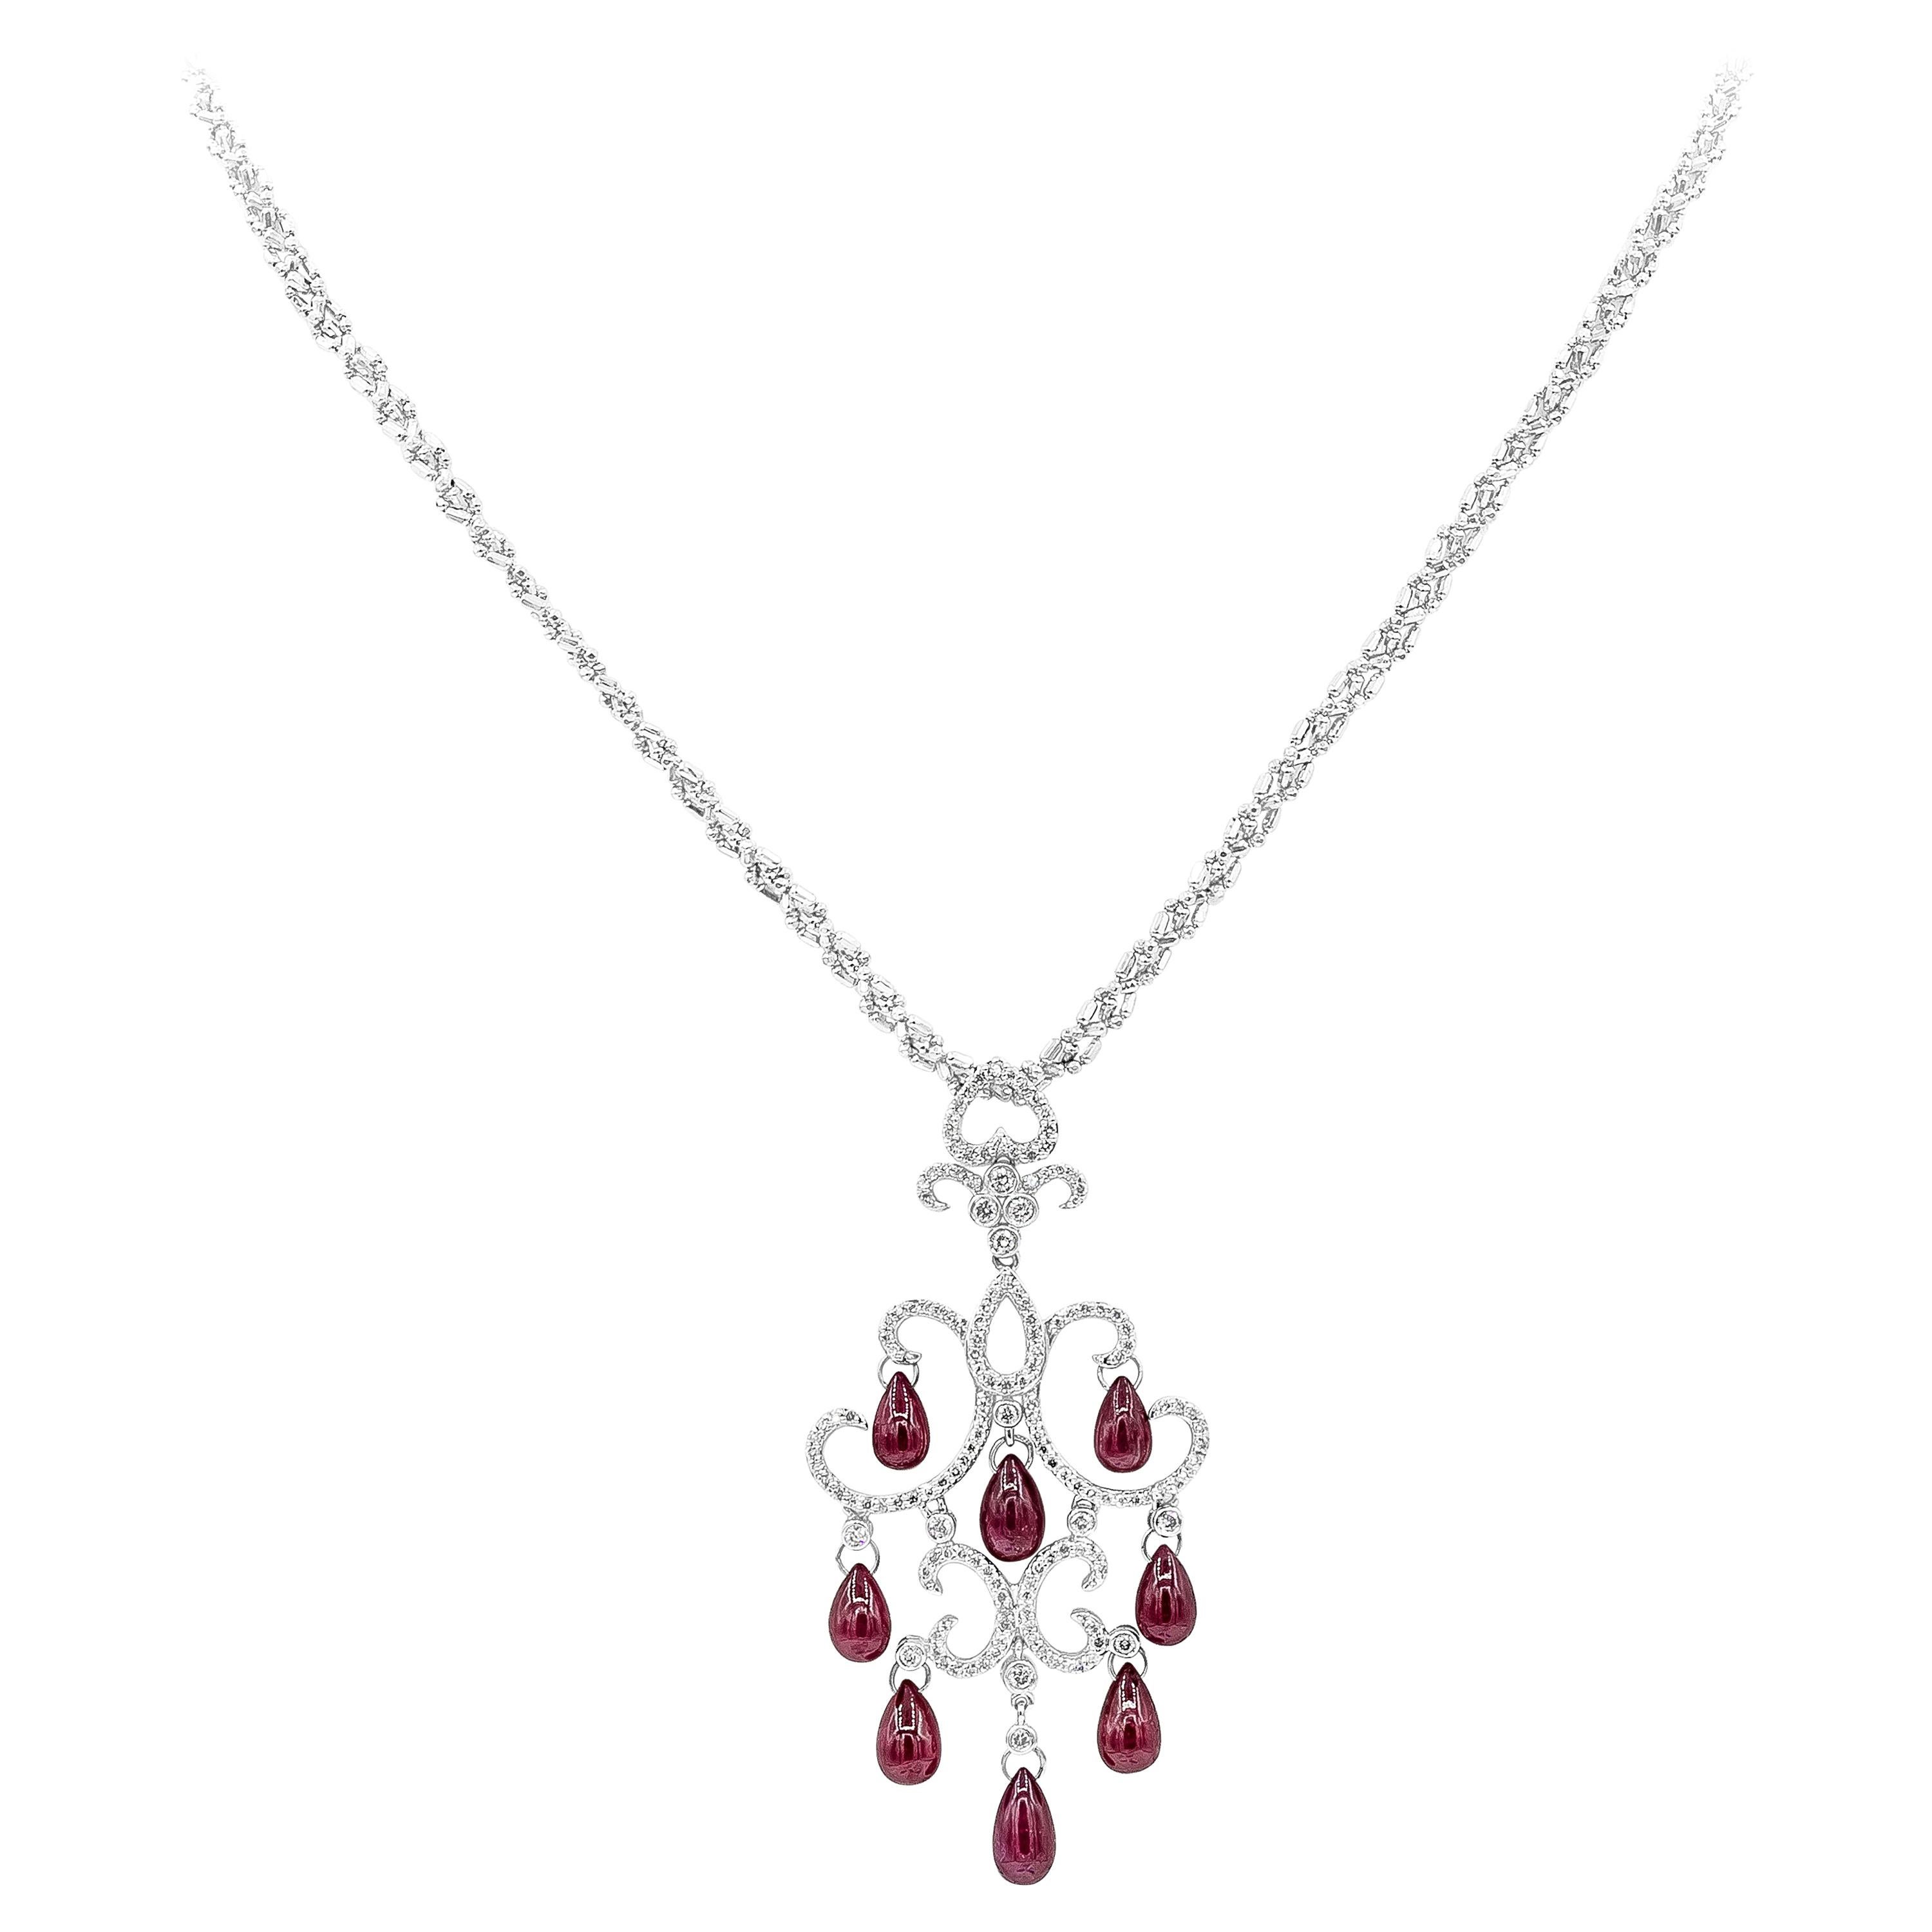 16.25 Carats Briolette Rubies with Round Cut Diamonds Chandelier Necklace For Sale